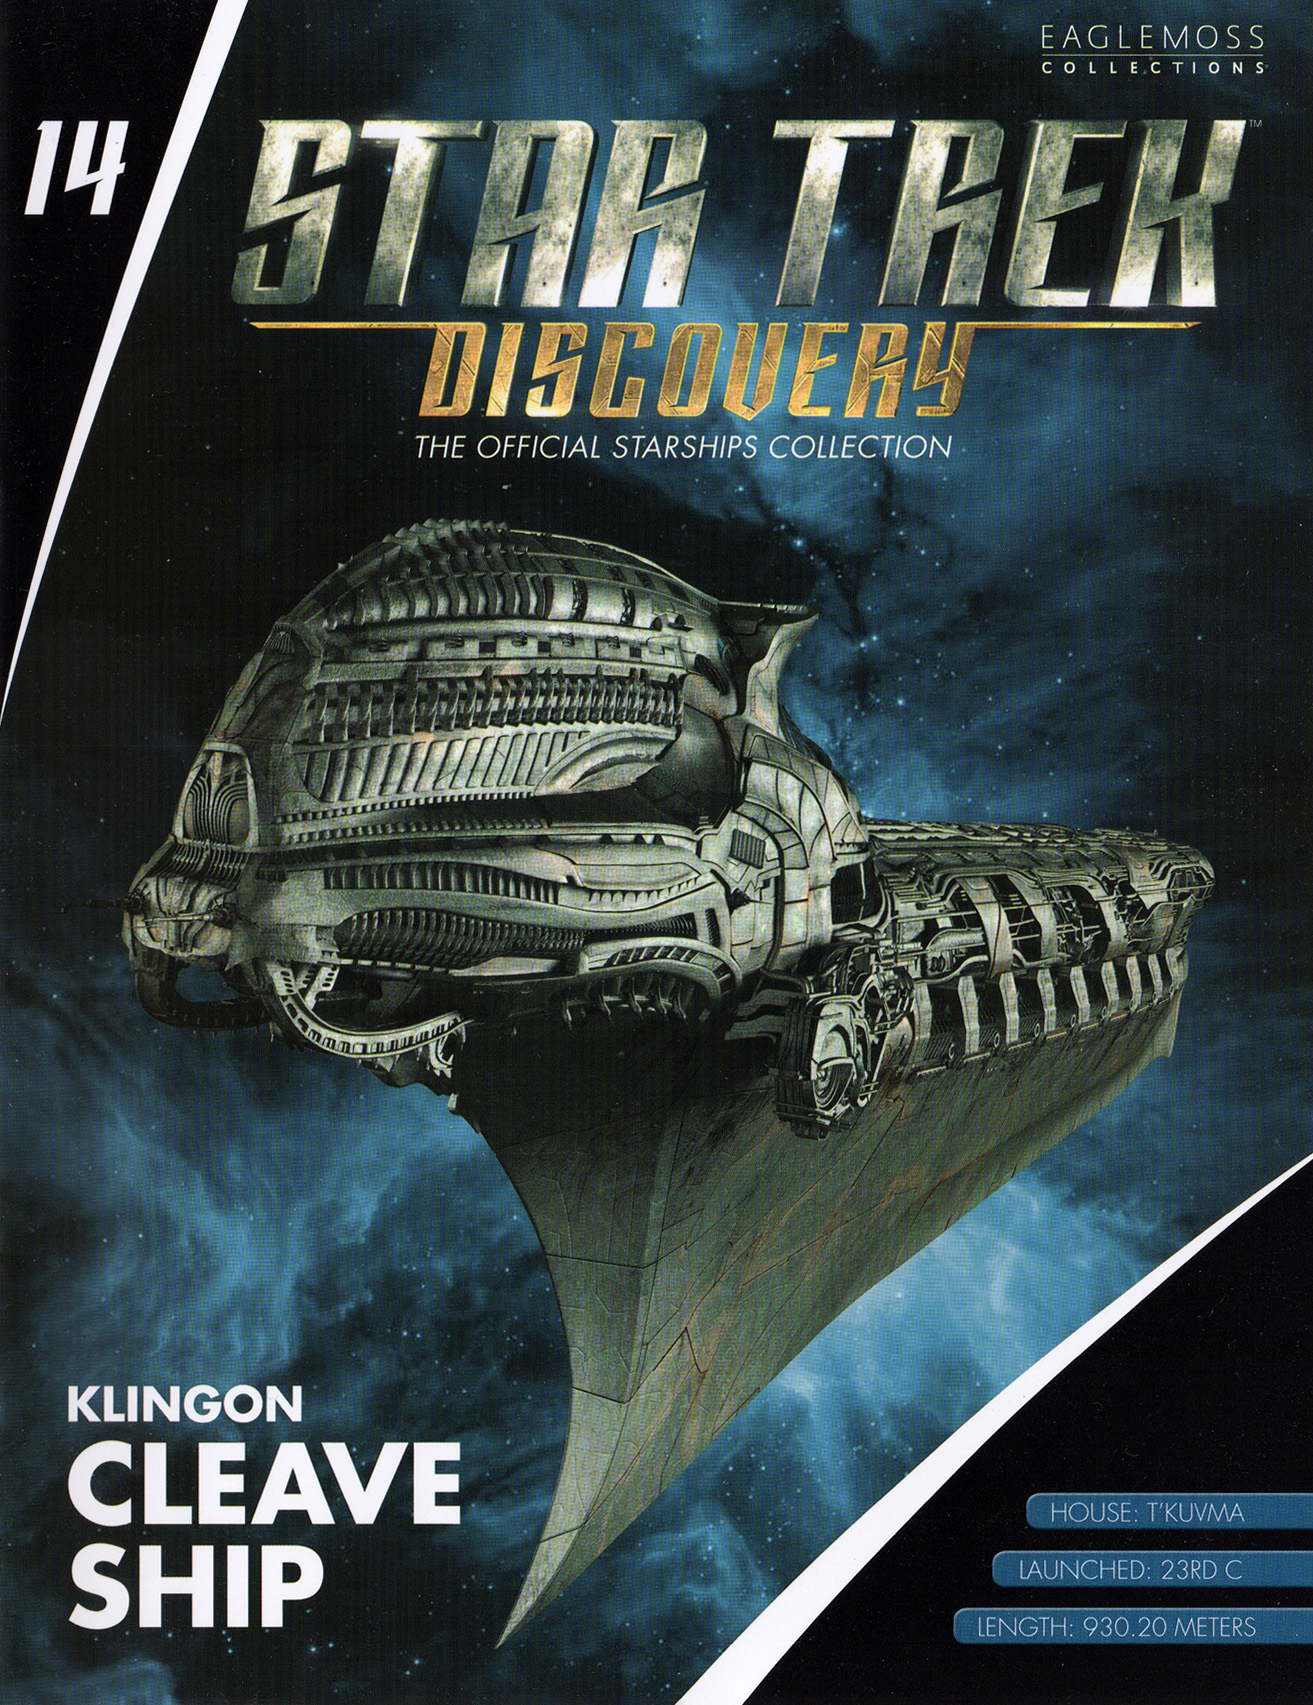 Star Trek: Discovery- The Official Starships Collection #14.jpg